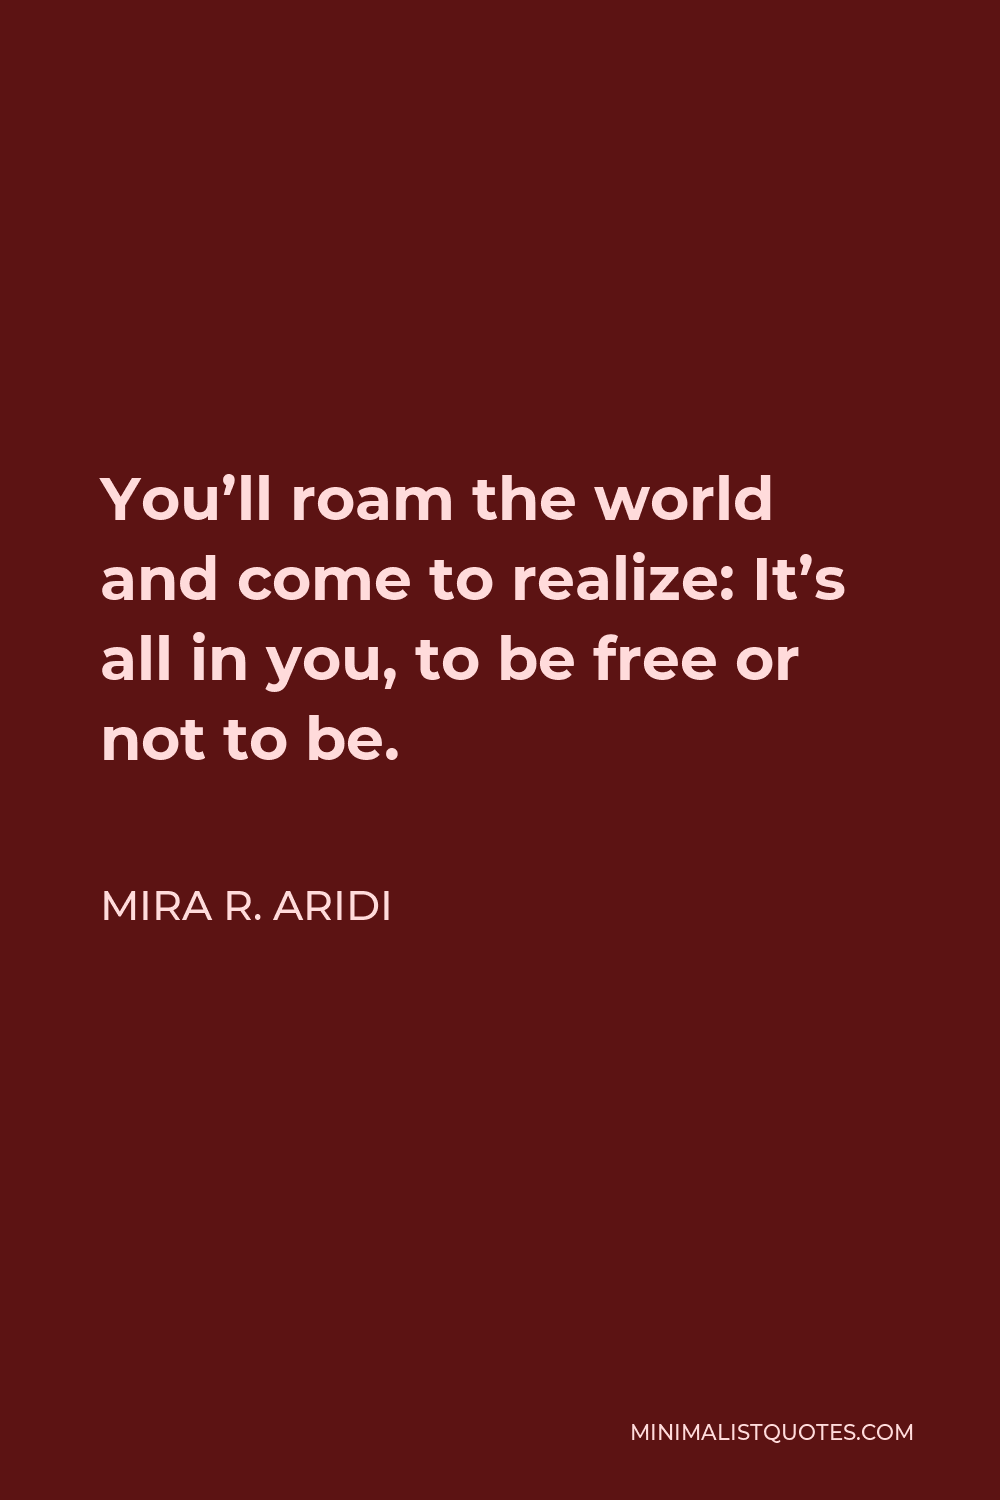 Mira R. Aridi Quote - You’ll roam the world and come to realize: It’s all in you, to be free or not to be.